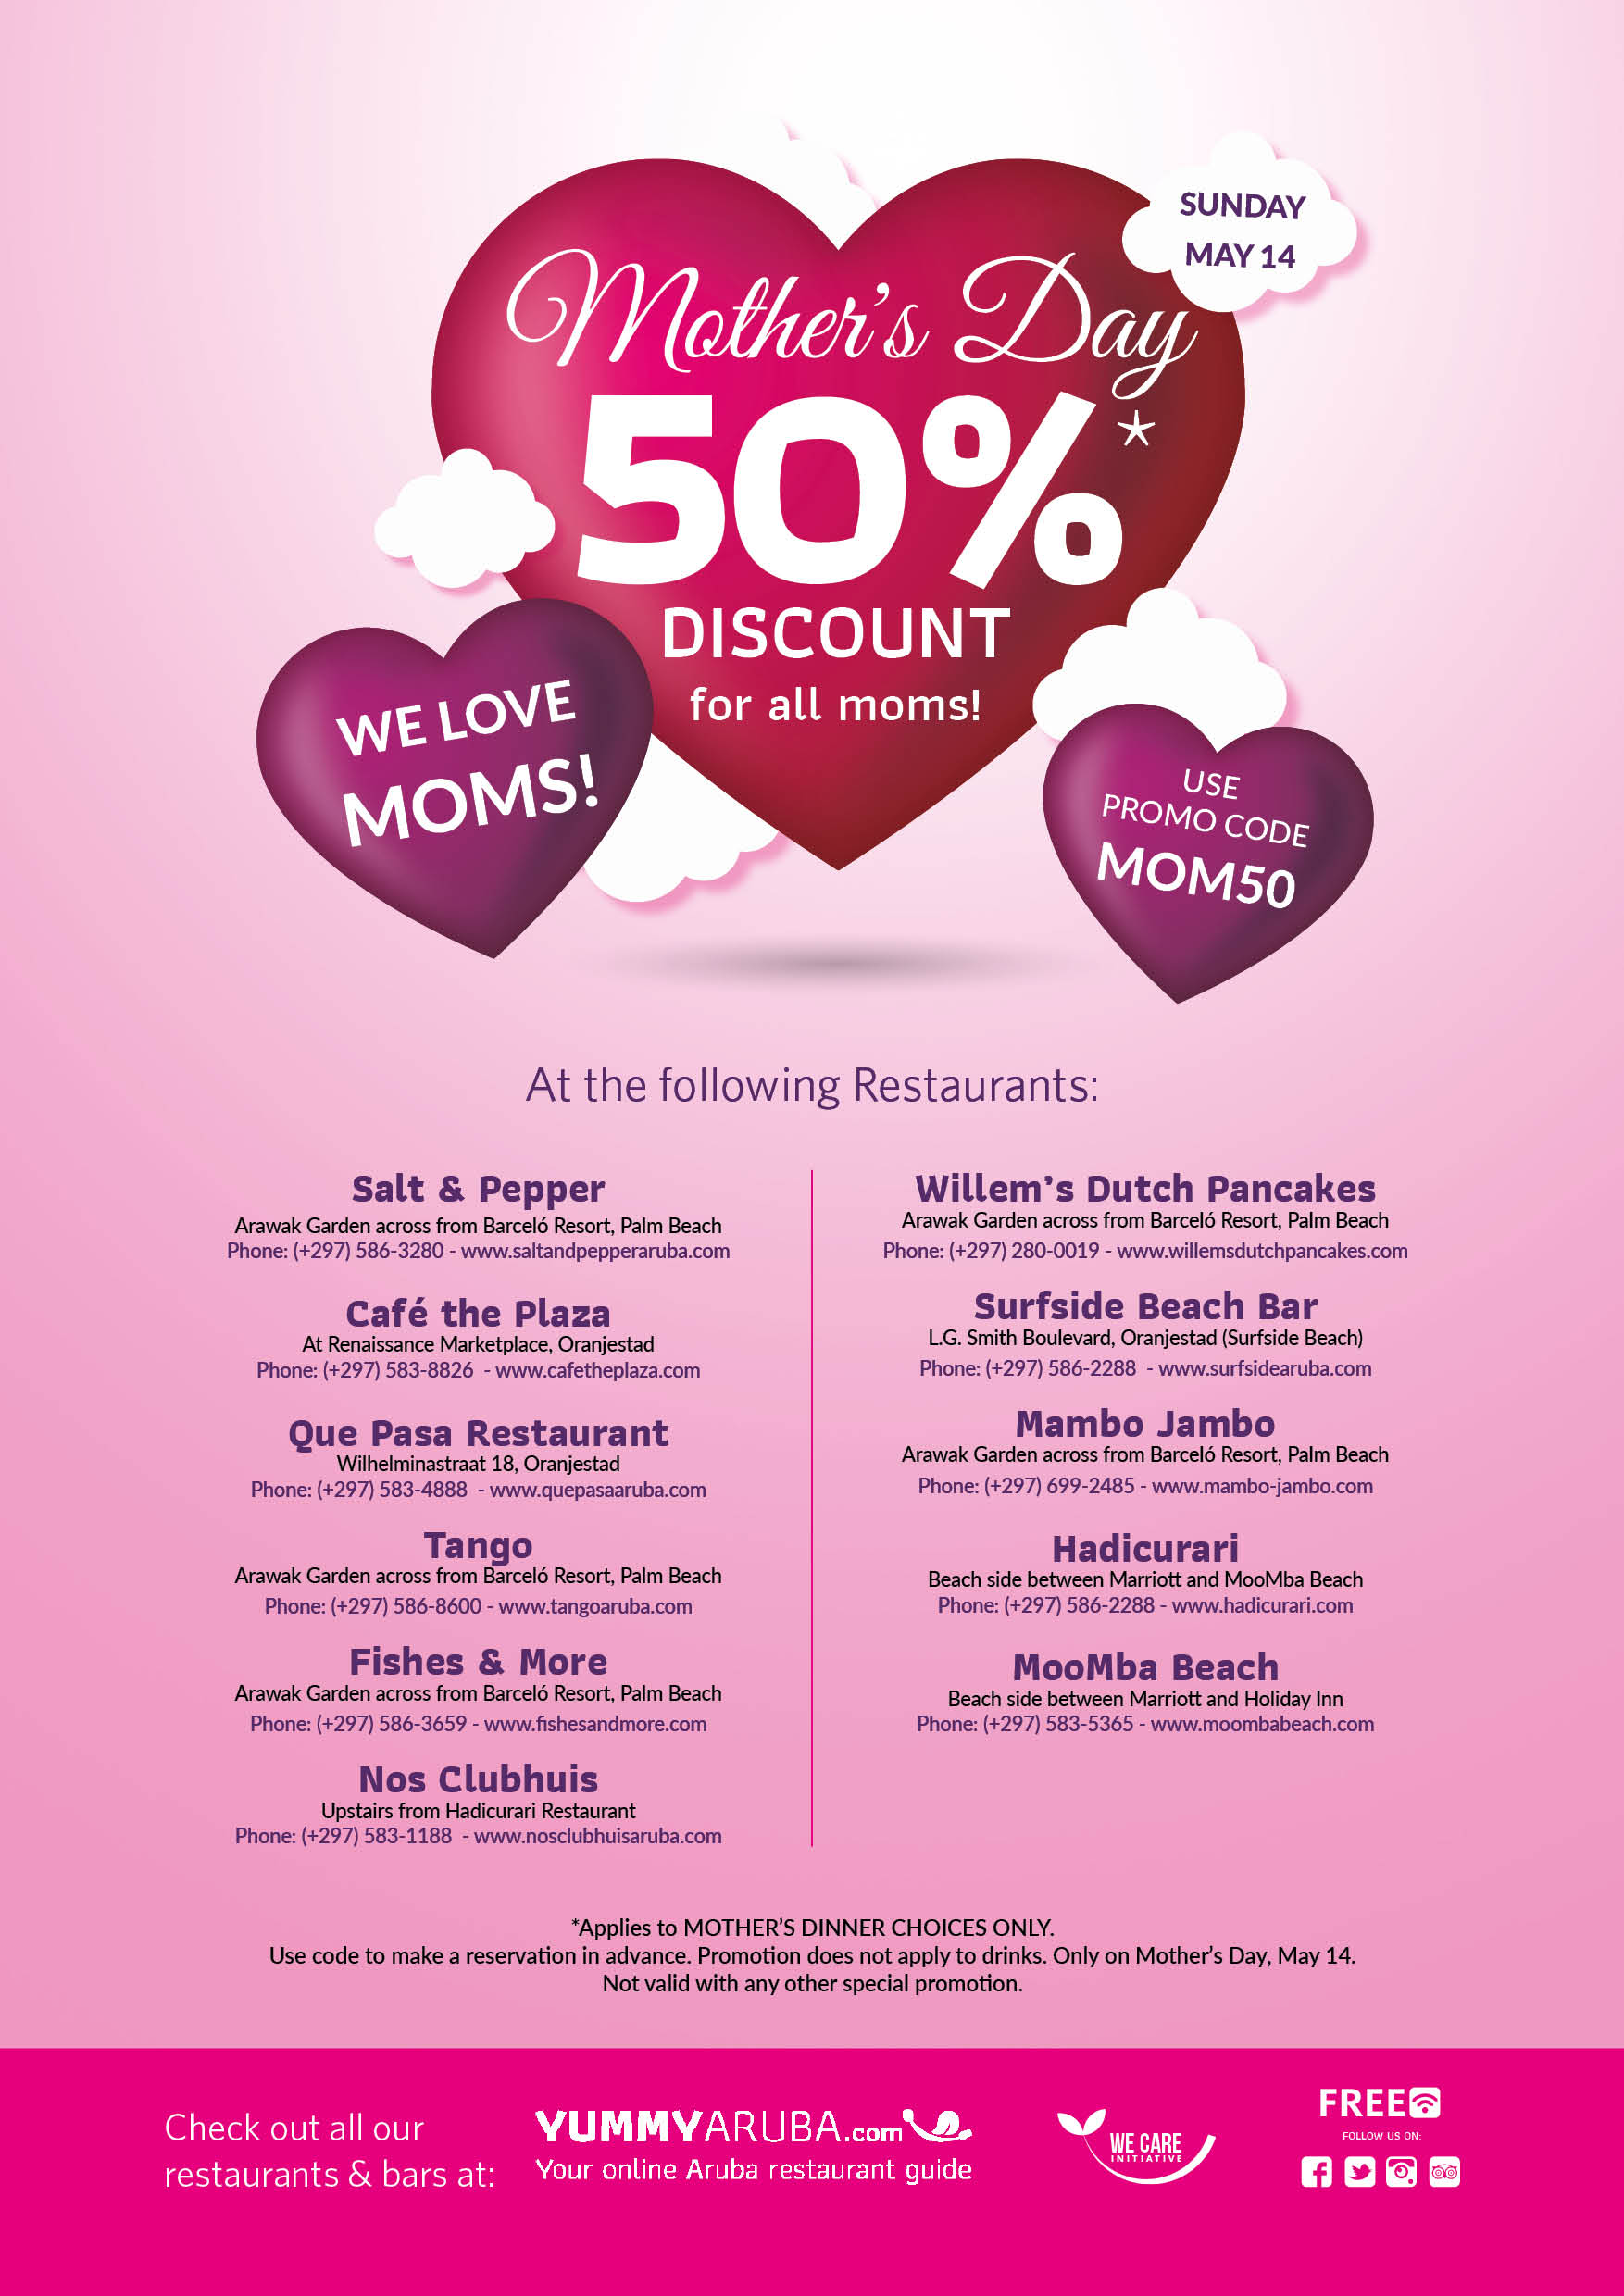 Looking for a special treat for the most important woman in your life? YummyAruba and 11 of the island's top restaurants have teamed up to offer an amazing 50% discount on Mother's Day. Read on to know more!